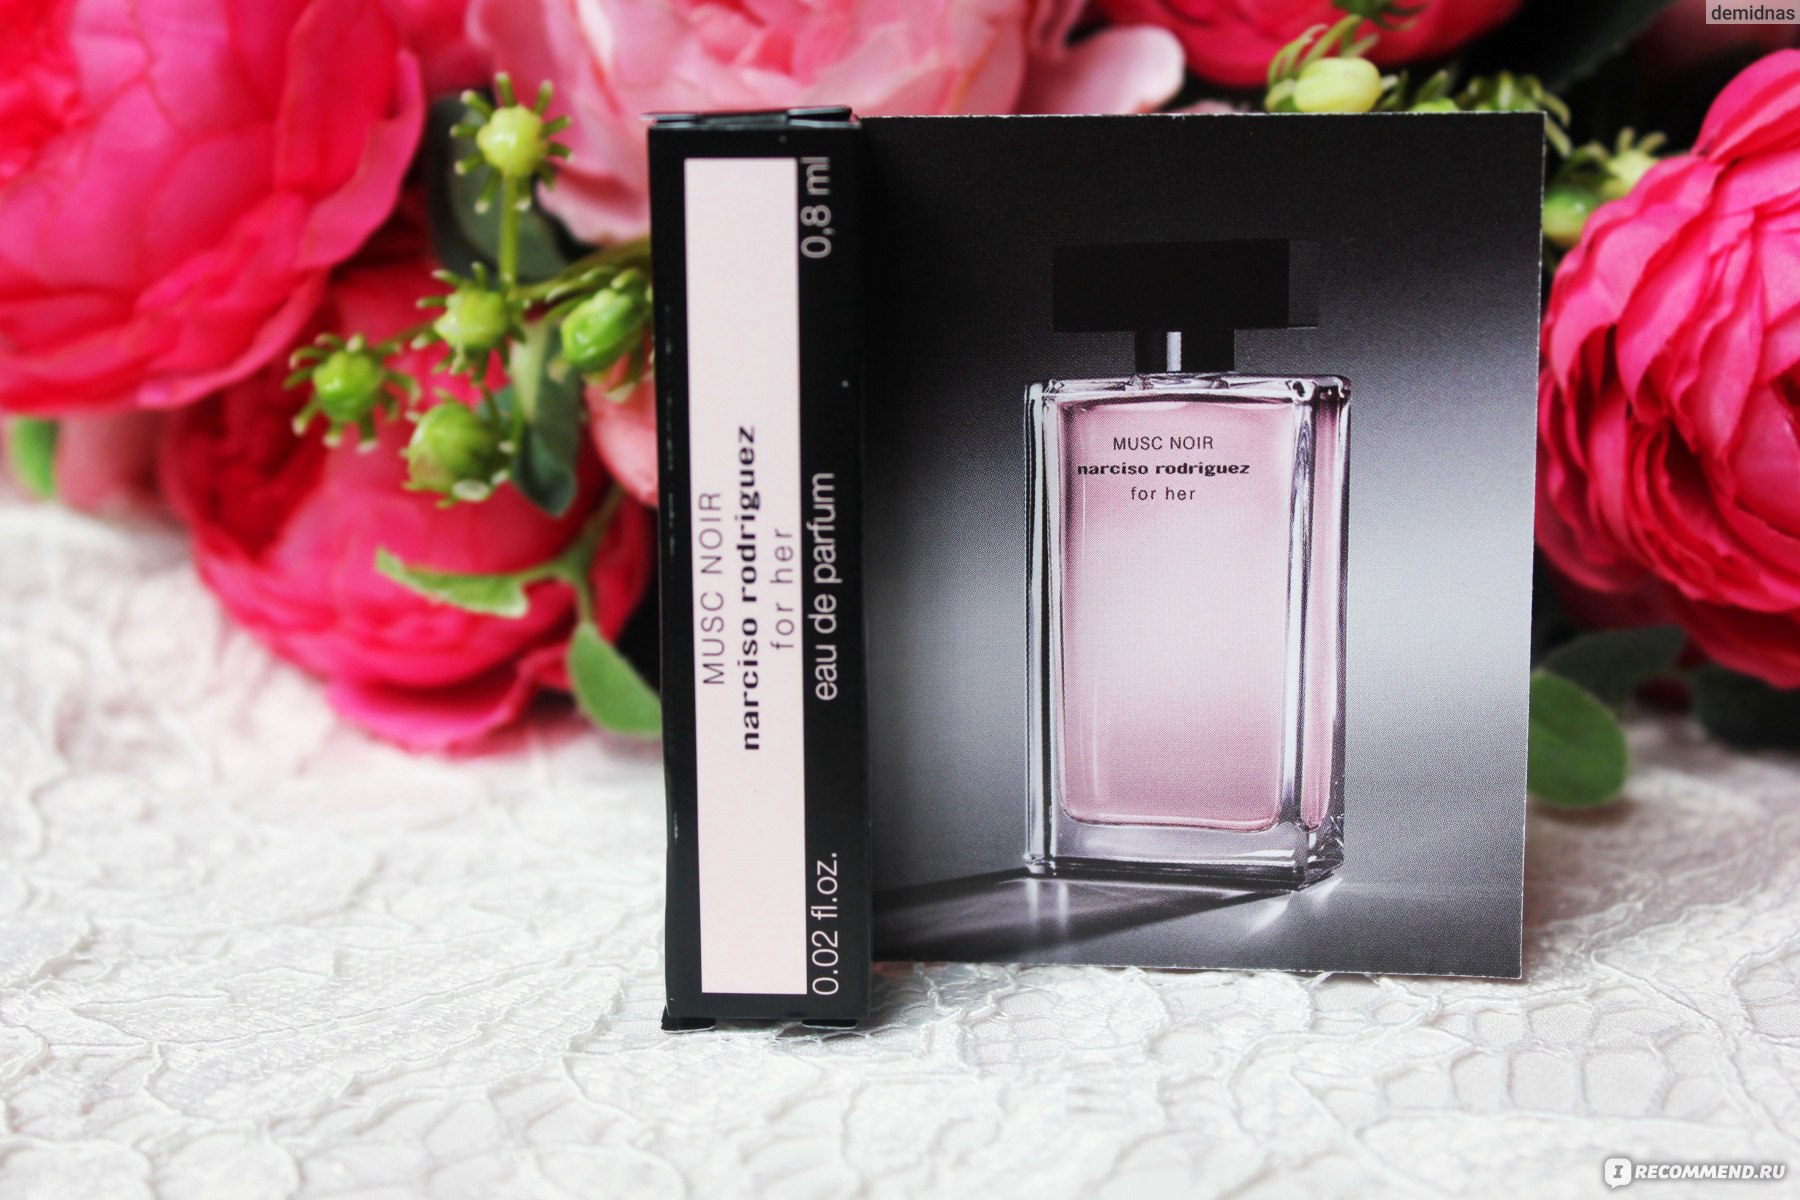 Narciso rodriguez for her rose